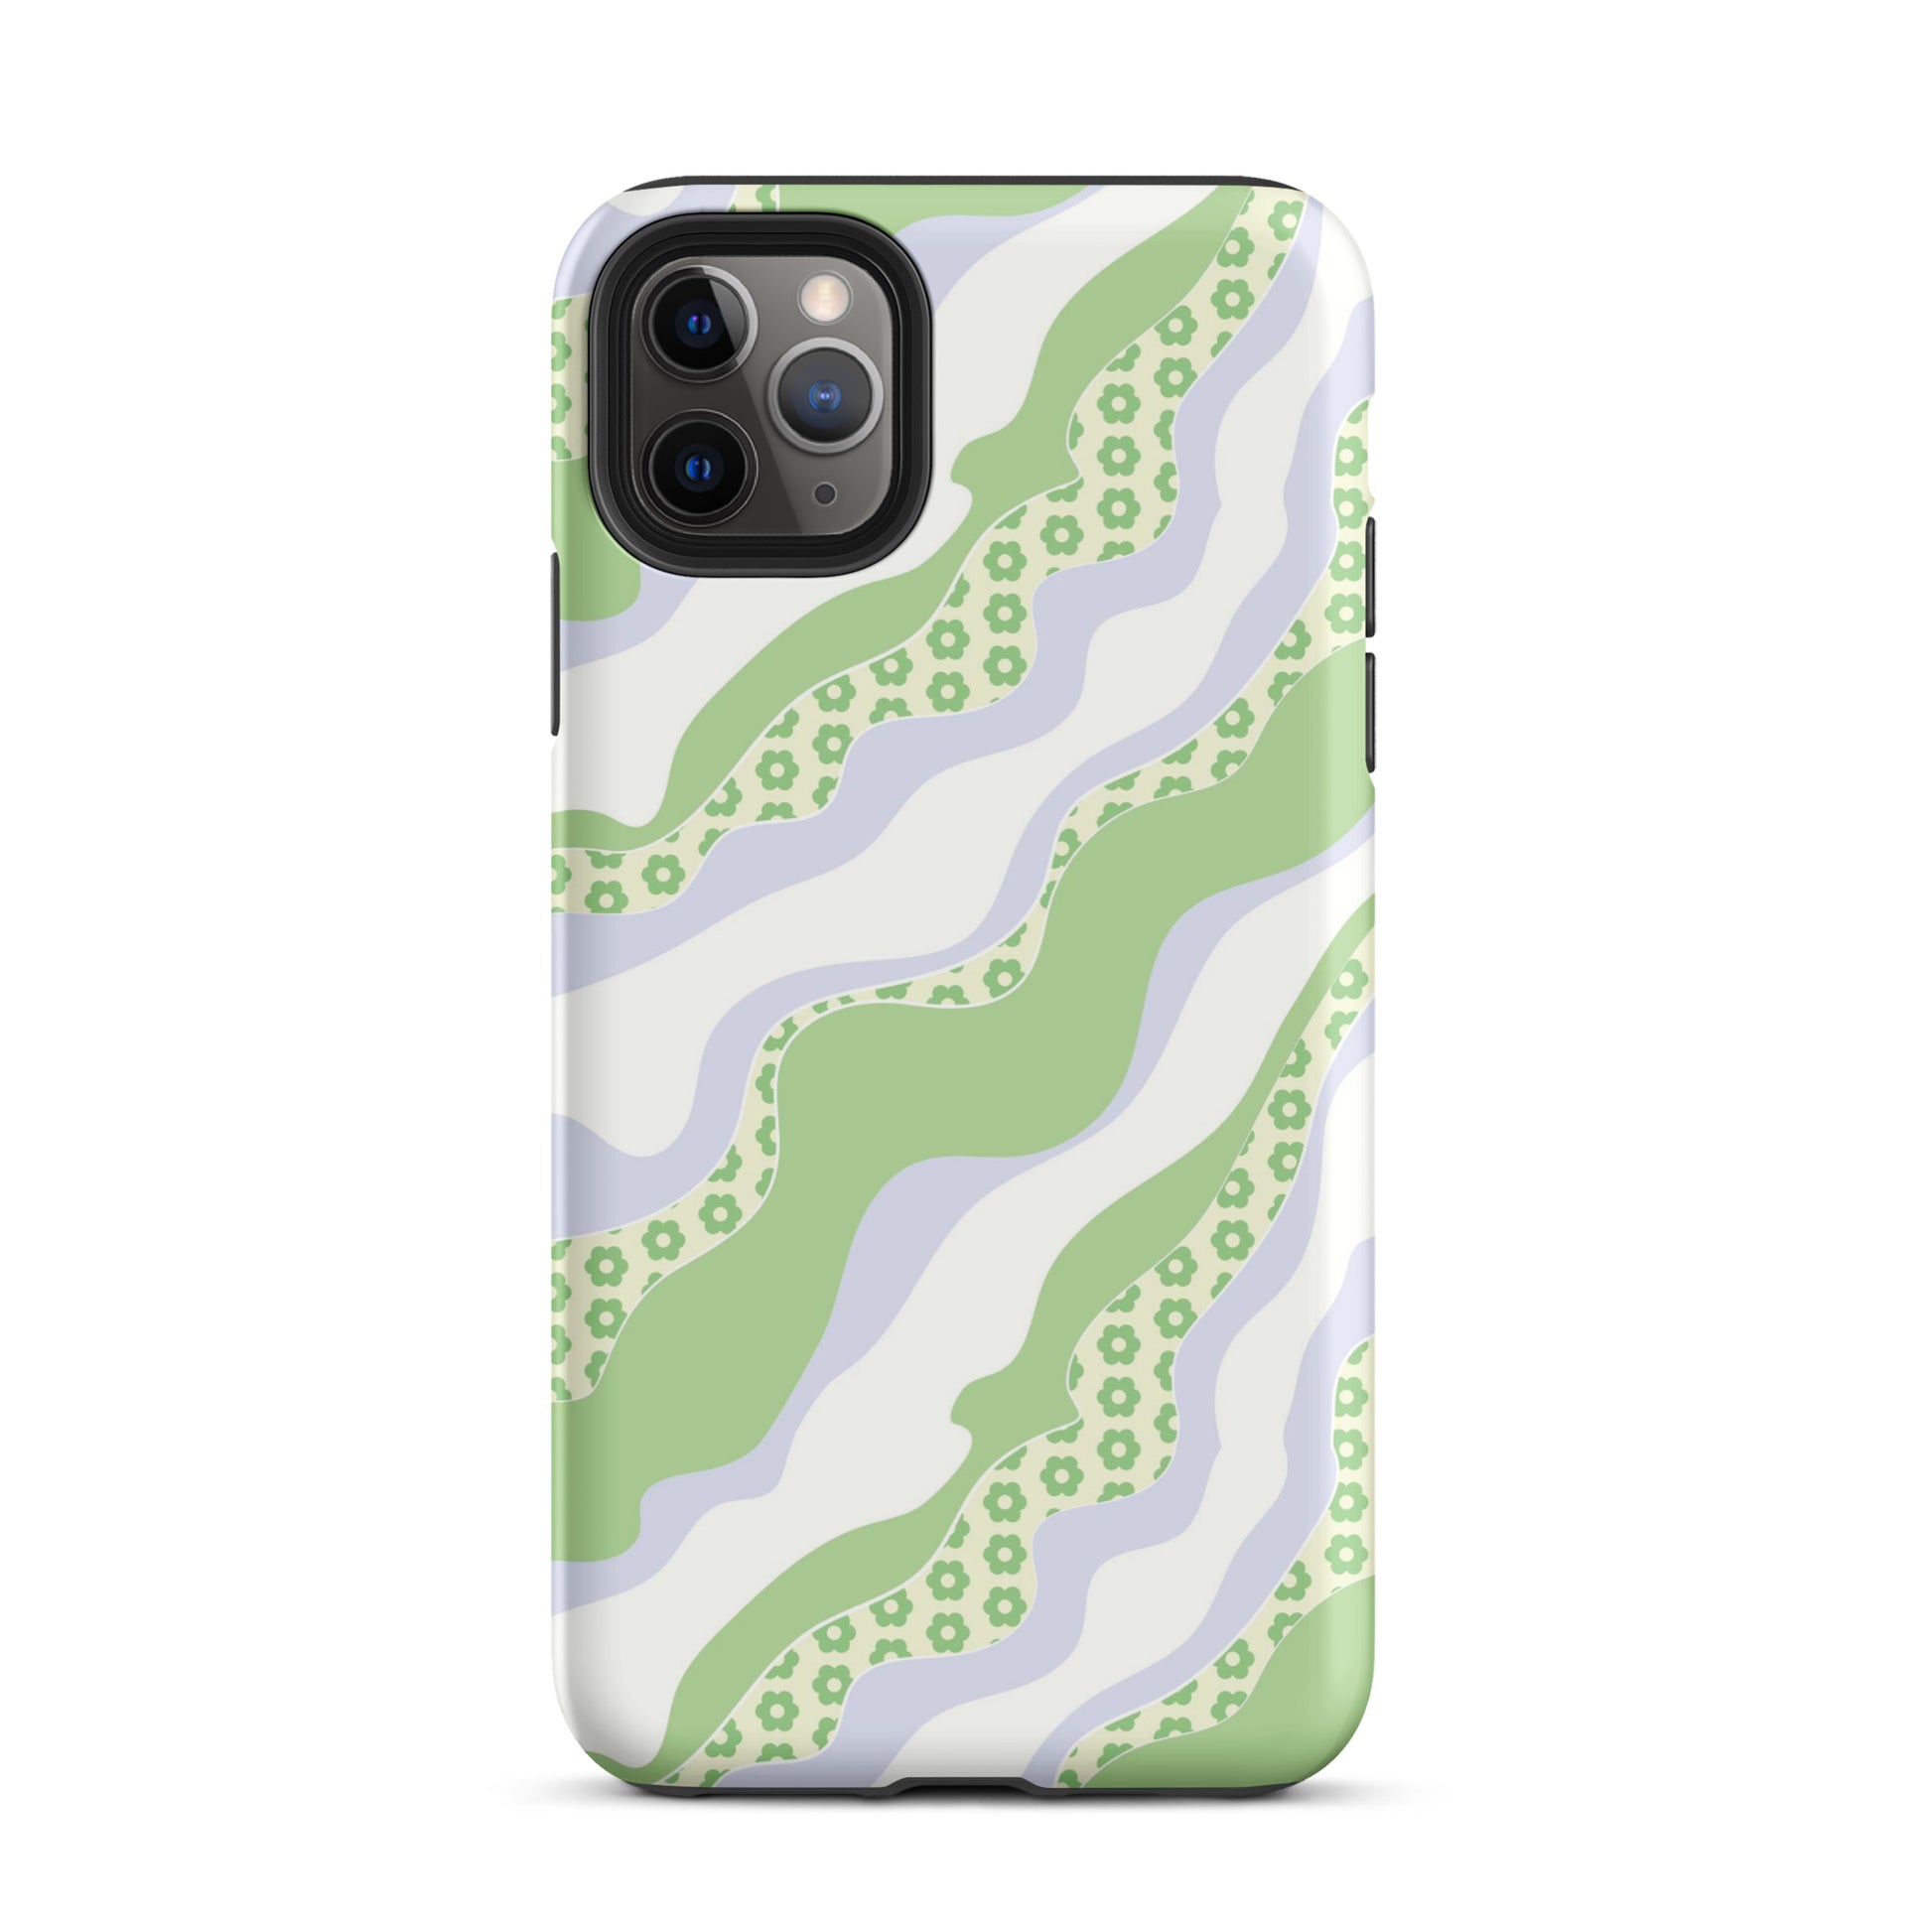 Flower Groove iPhone Case Matte iPhone 11 Pro Max